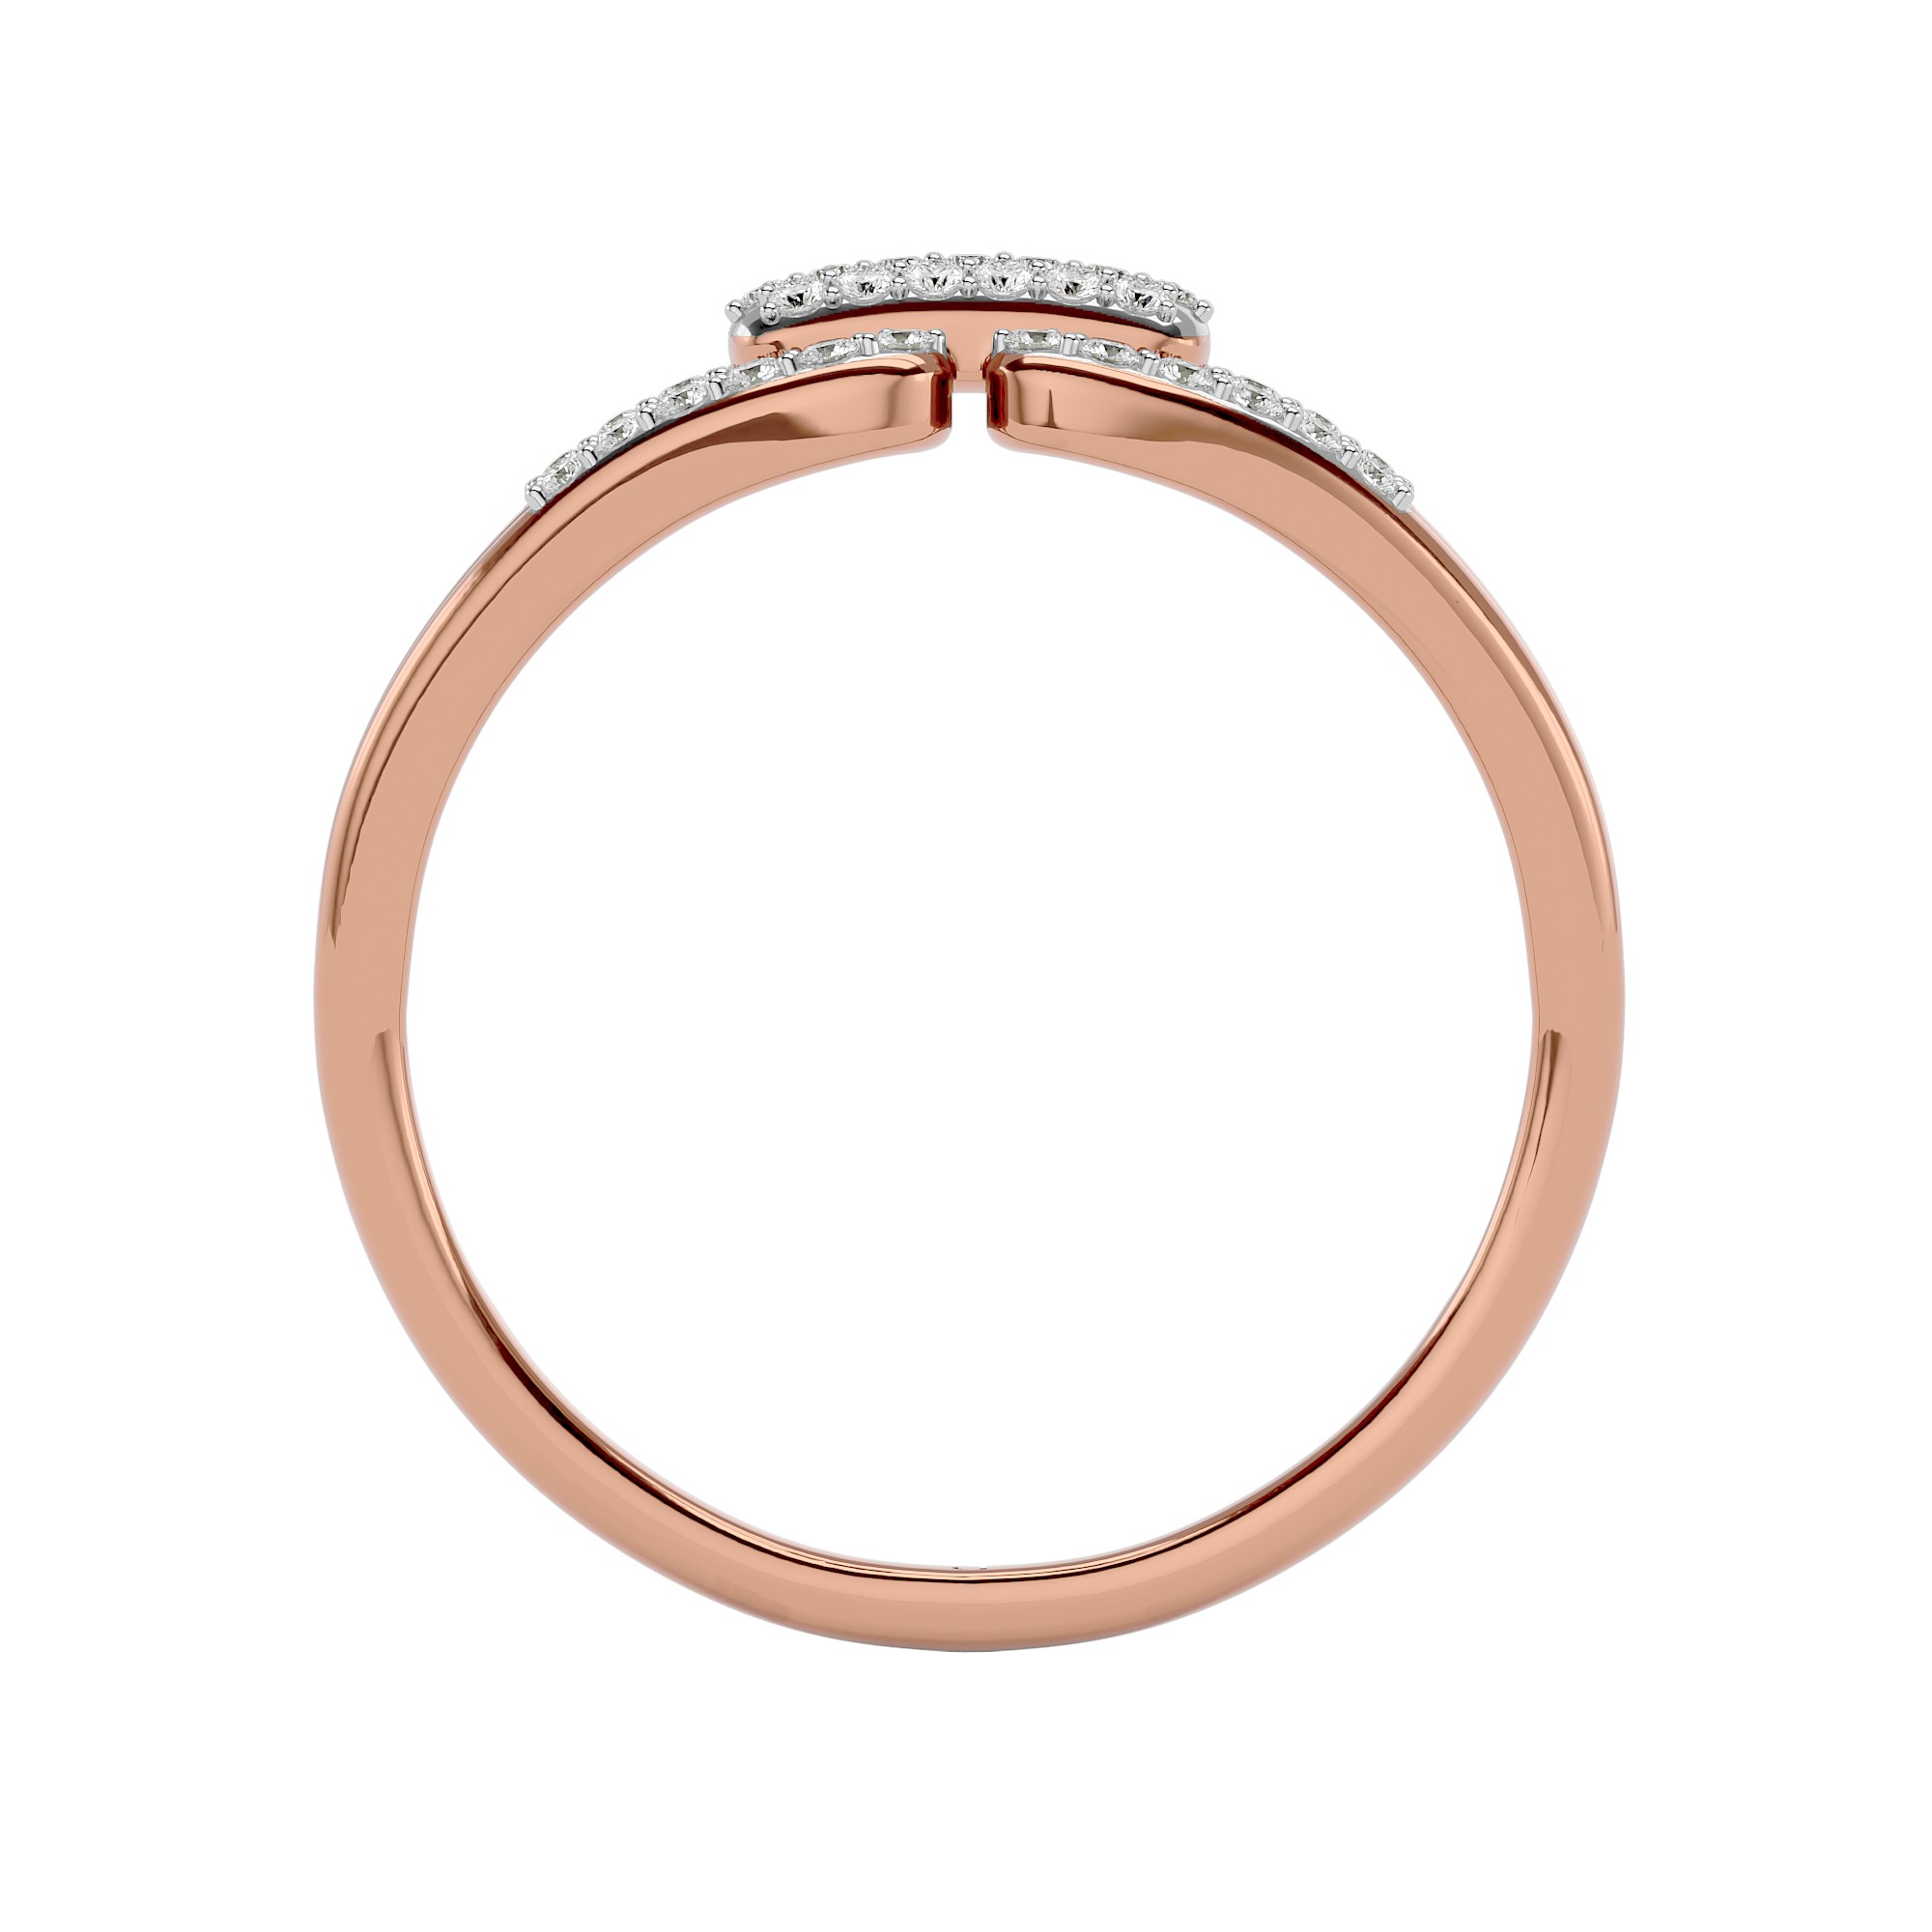 0.12Ct Solitaire Diamond Promise Ring in 14Kt Rose Gold - Blu Diamonds